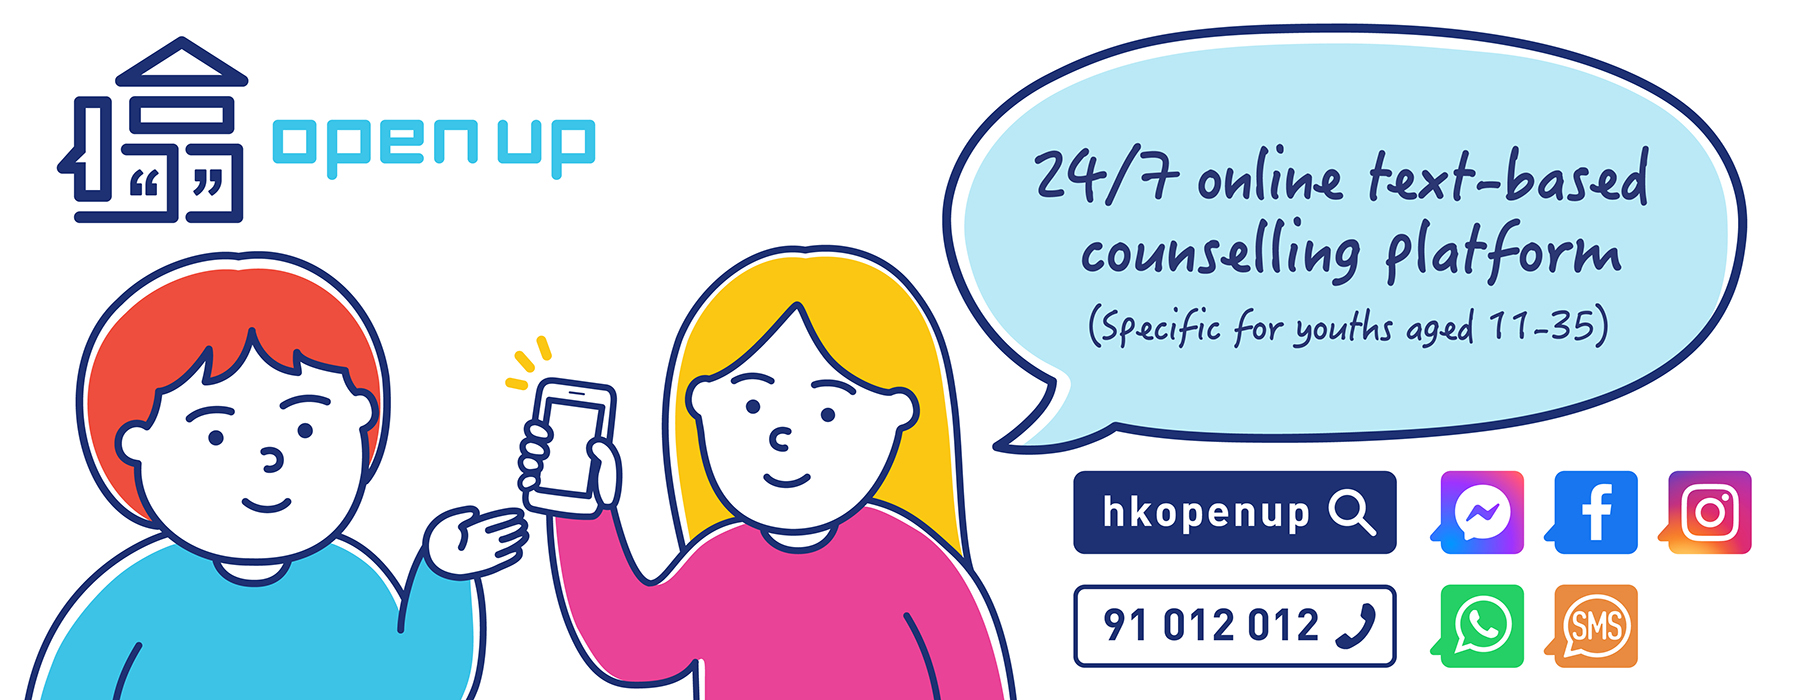 A banner link to hkopenup which is an 24/7  online text-based platform for counselling with contact no. 91012012 via various comuunication app